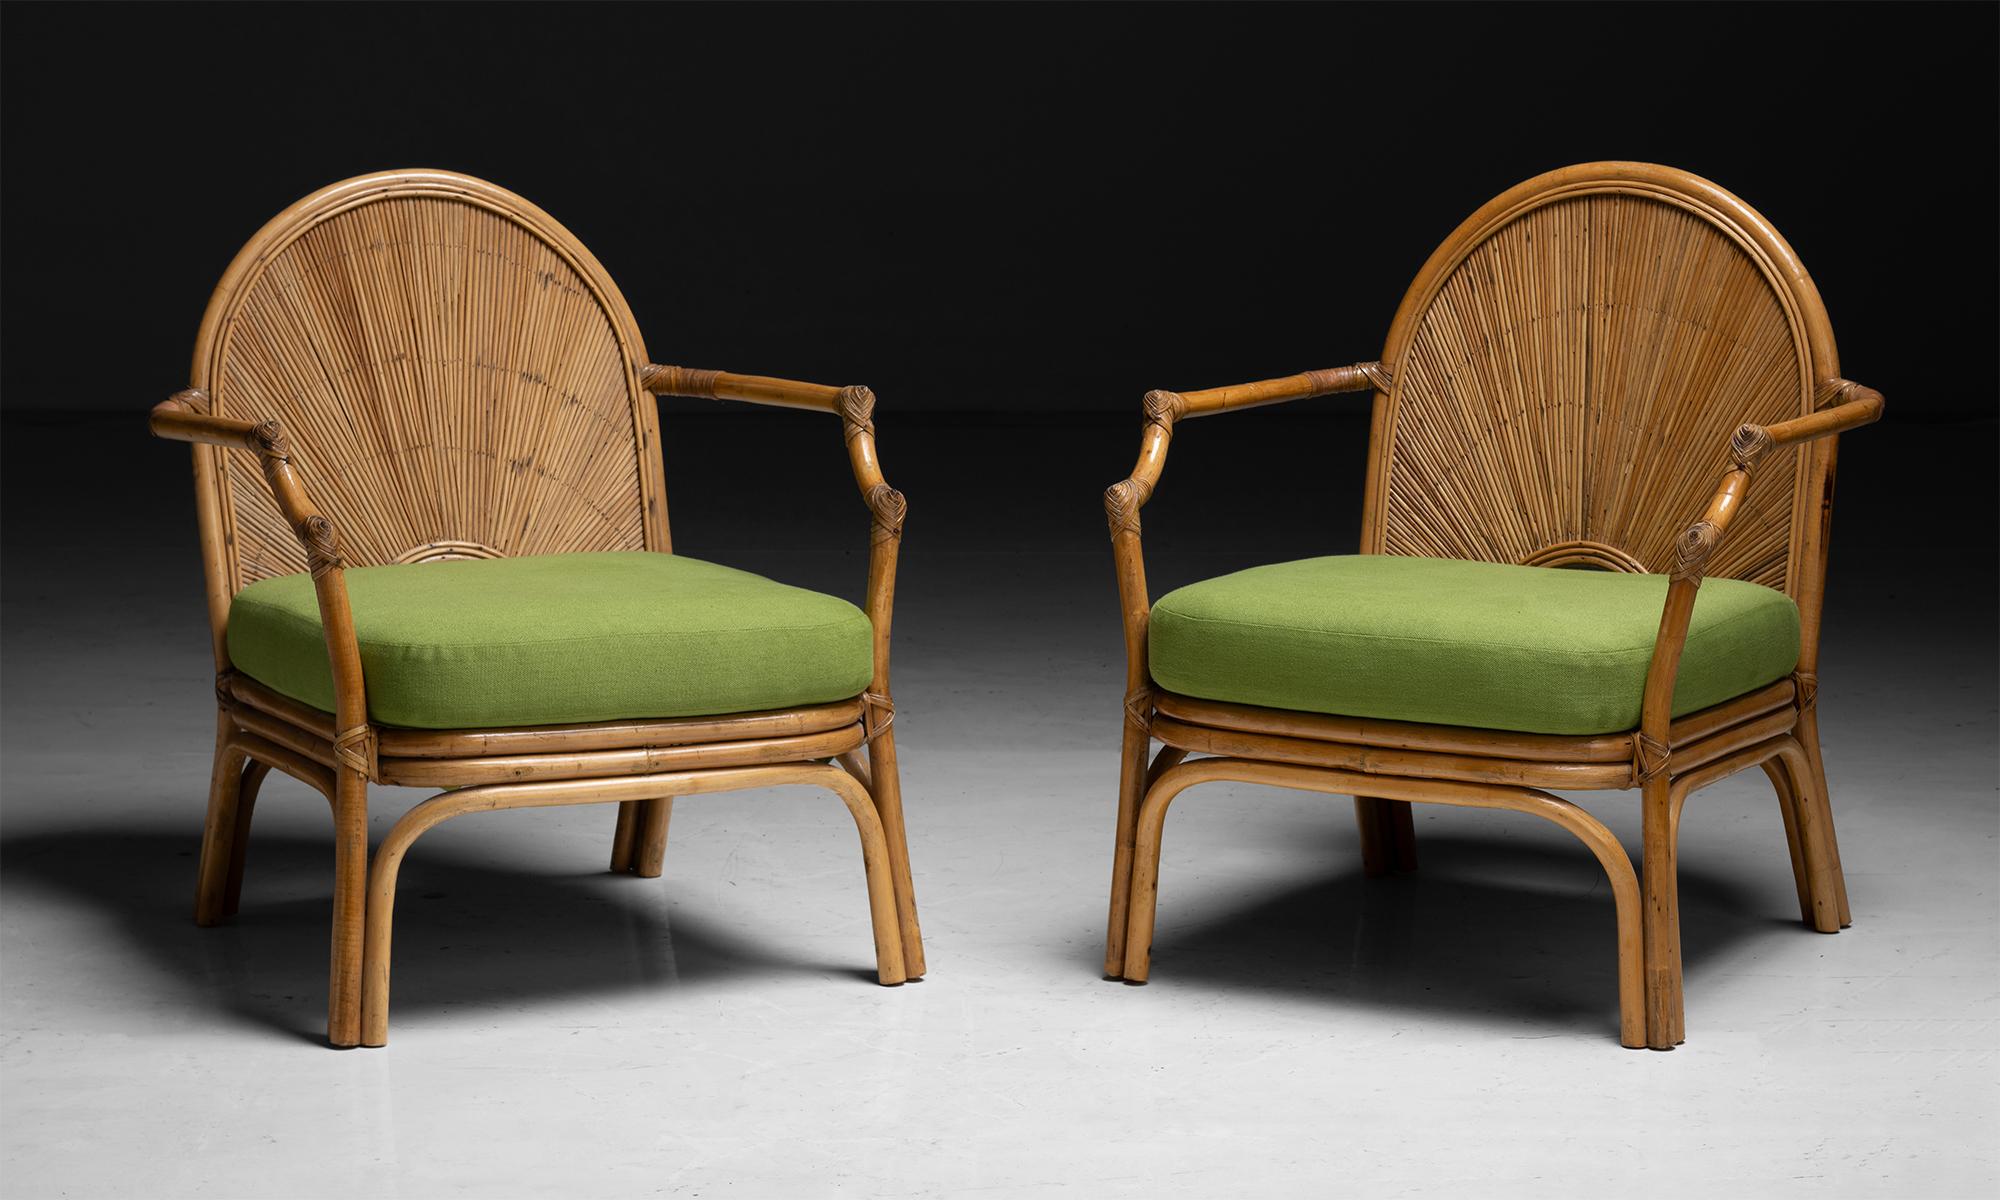 Pair of Rattan Armchairs

France circa 1960

In the style of Gabrielle Crespim newly upholstered in green linen by Pierre Frey.

Measures 26.25”w x 26”d x 32”h x 16”seat